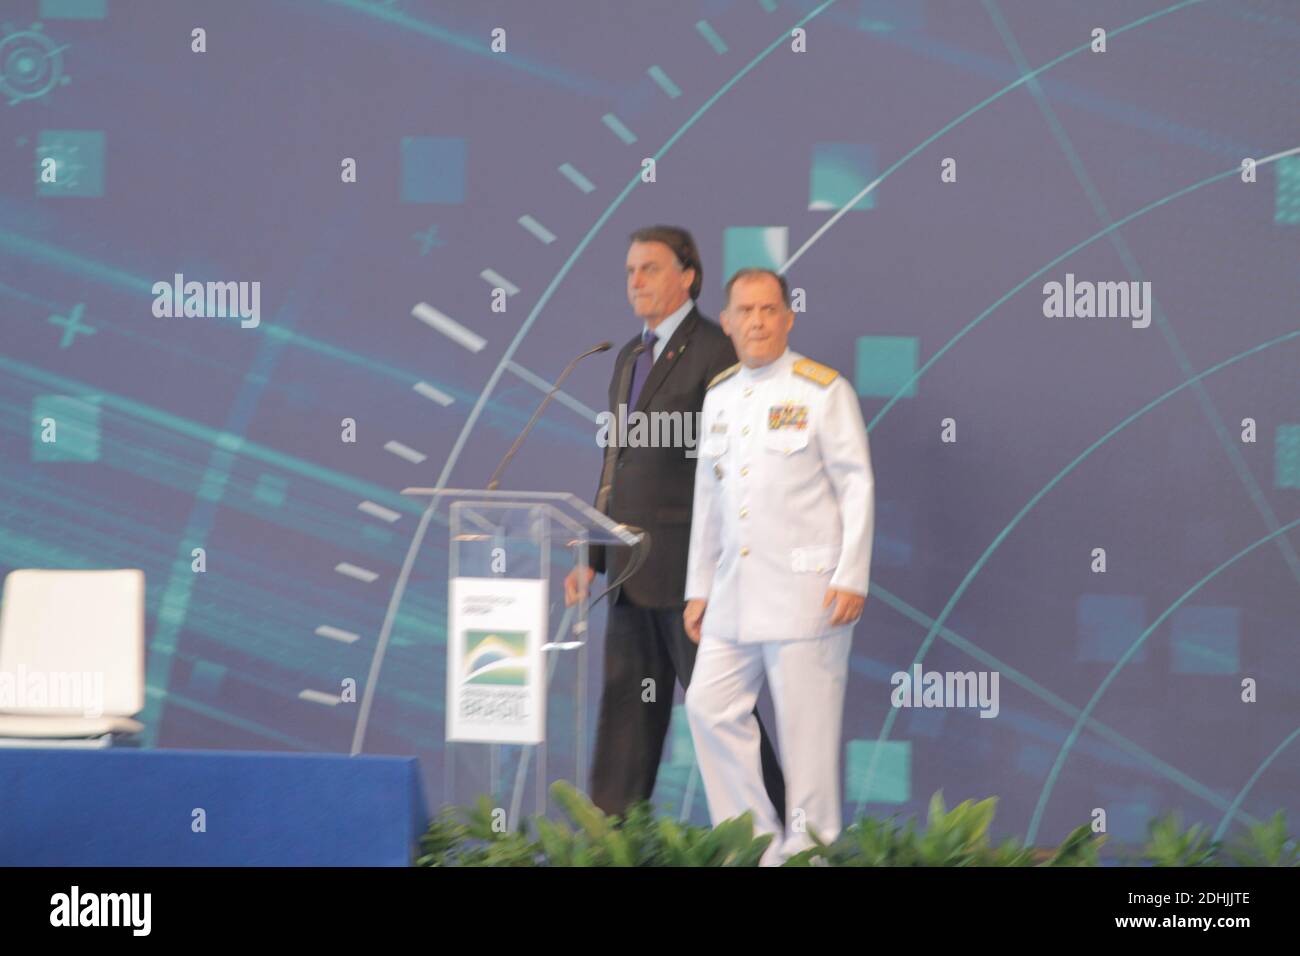 Itaguai, Brazil. 11th Dec, 2020.  LANÇAMENTO DO SUBMARINO HUMAITÁ - President Jair Bolsonaro and Admiral Ilques Barbosa, commander of the Navy during the Launching Ceremony of the Submarine Humaitá and Integration of the hull of the Toneleiro submarine, held this morning (11, at the Naval Complex of Itaguaí on the island of Madeira in the city of Itaguaí, RJ . Credit: Foto Arena LTDA/Alamy Live News Stock Photo